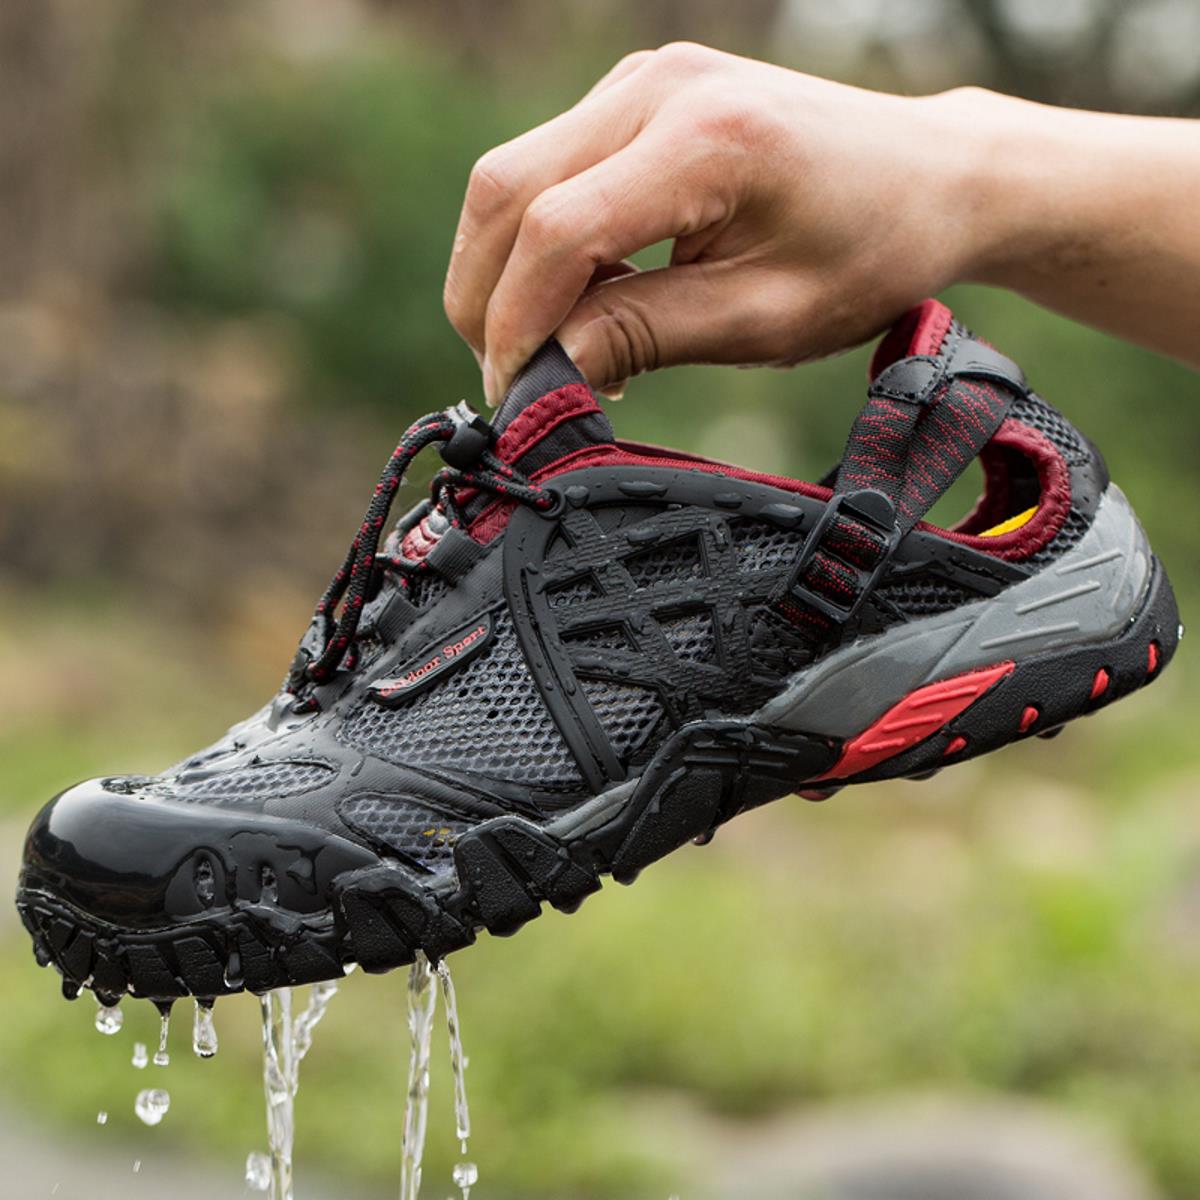 best water shoes for hiking men's